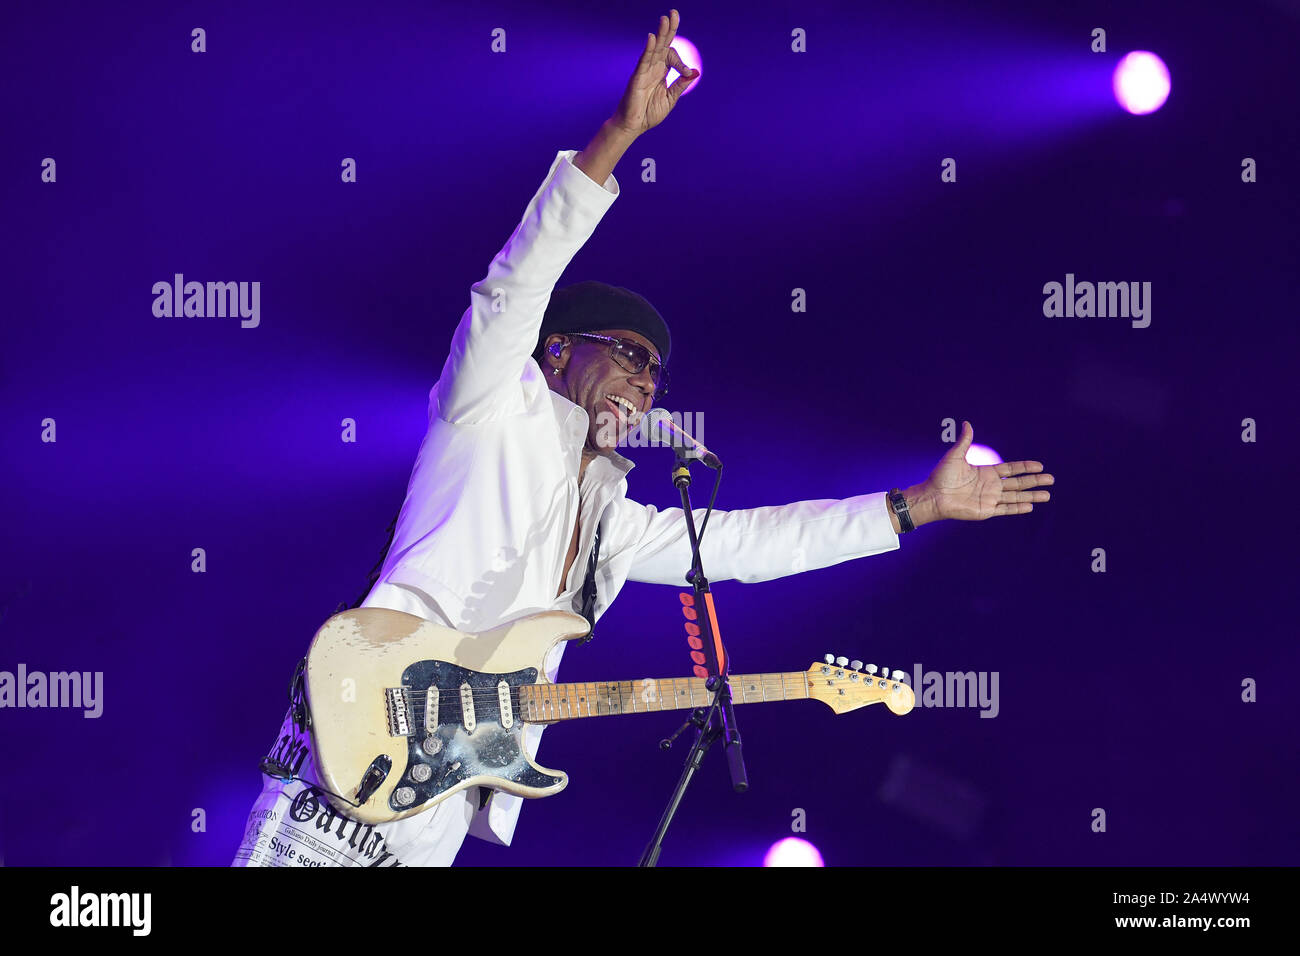 Rio de Janeiro, Brazil, October 3, 2019. Guitarist Nile Rodgers of the band Chic during his show at Rock in Rio 2019 in the city of Rio de Janeiro. Stock Photo